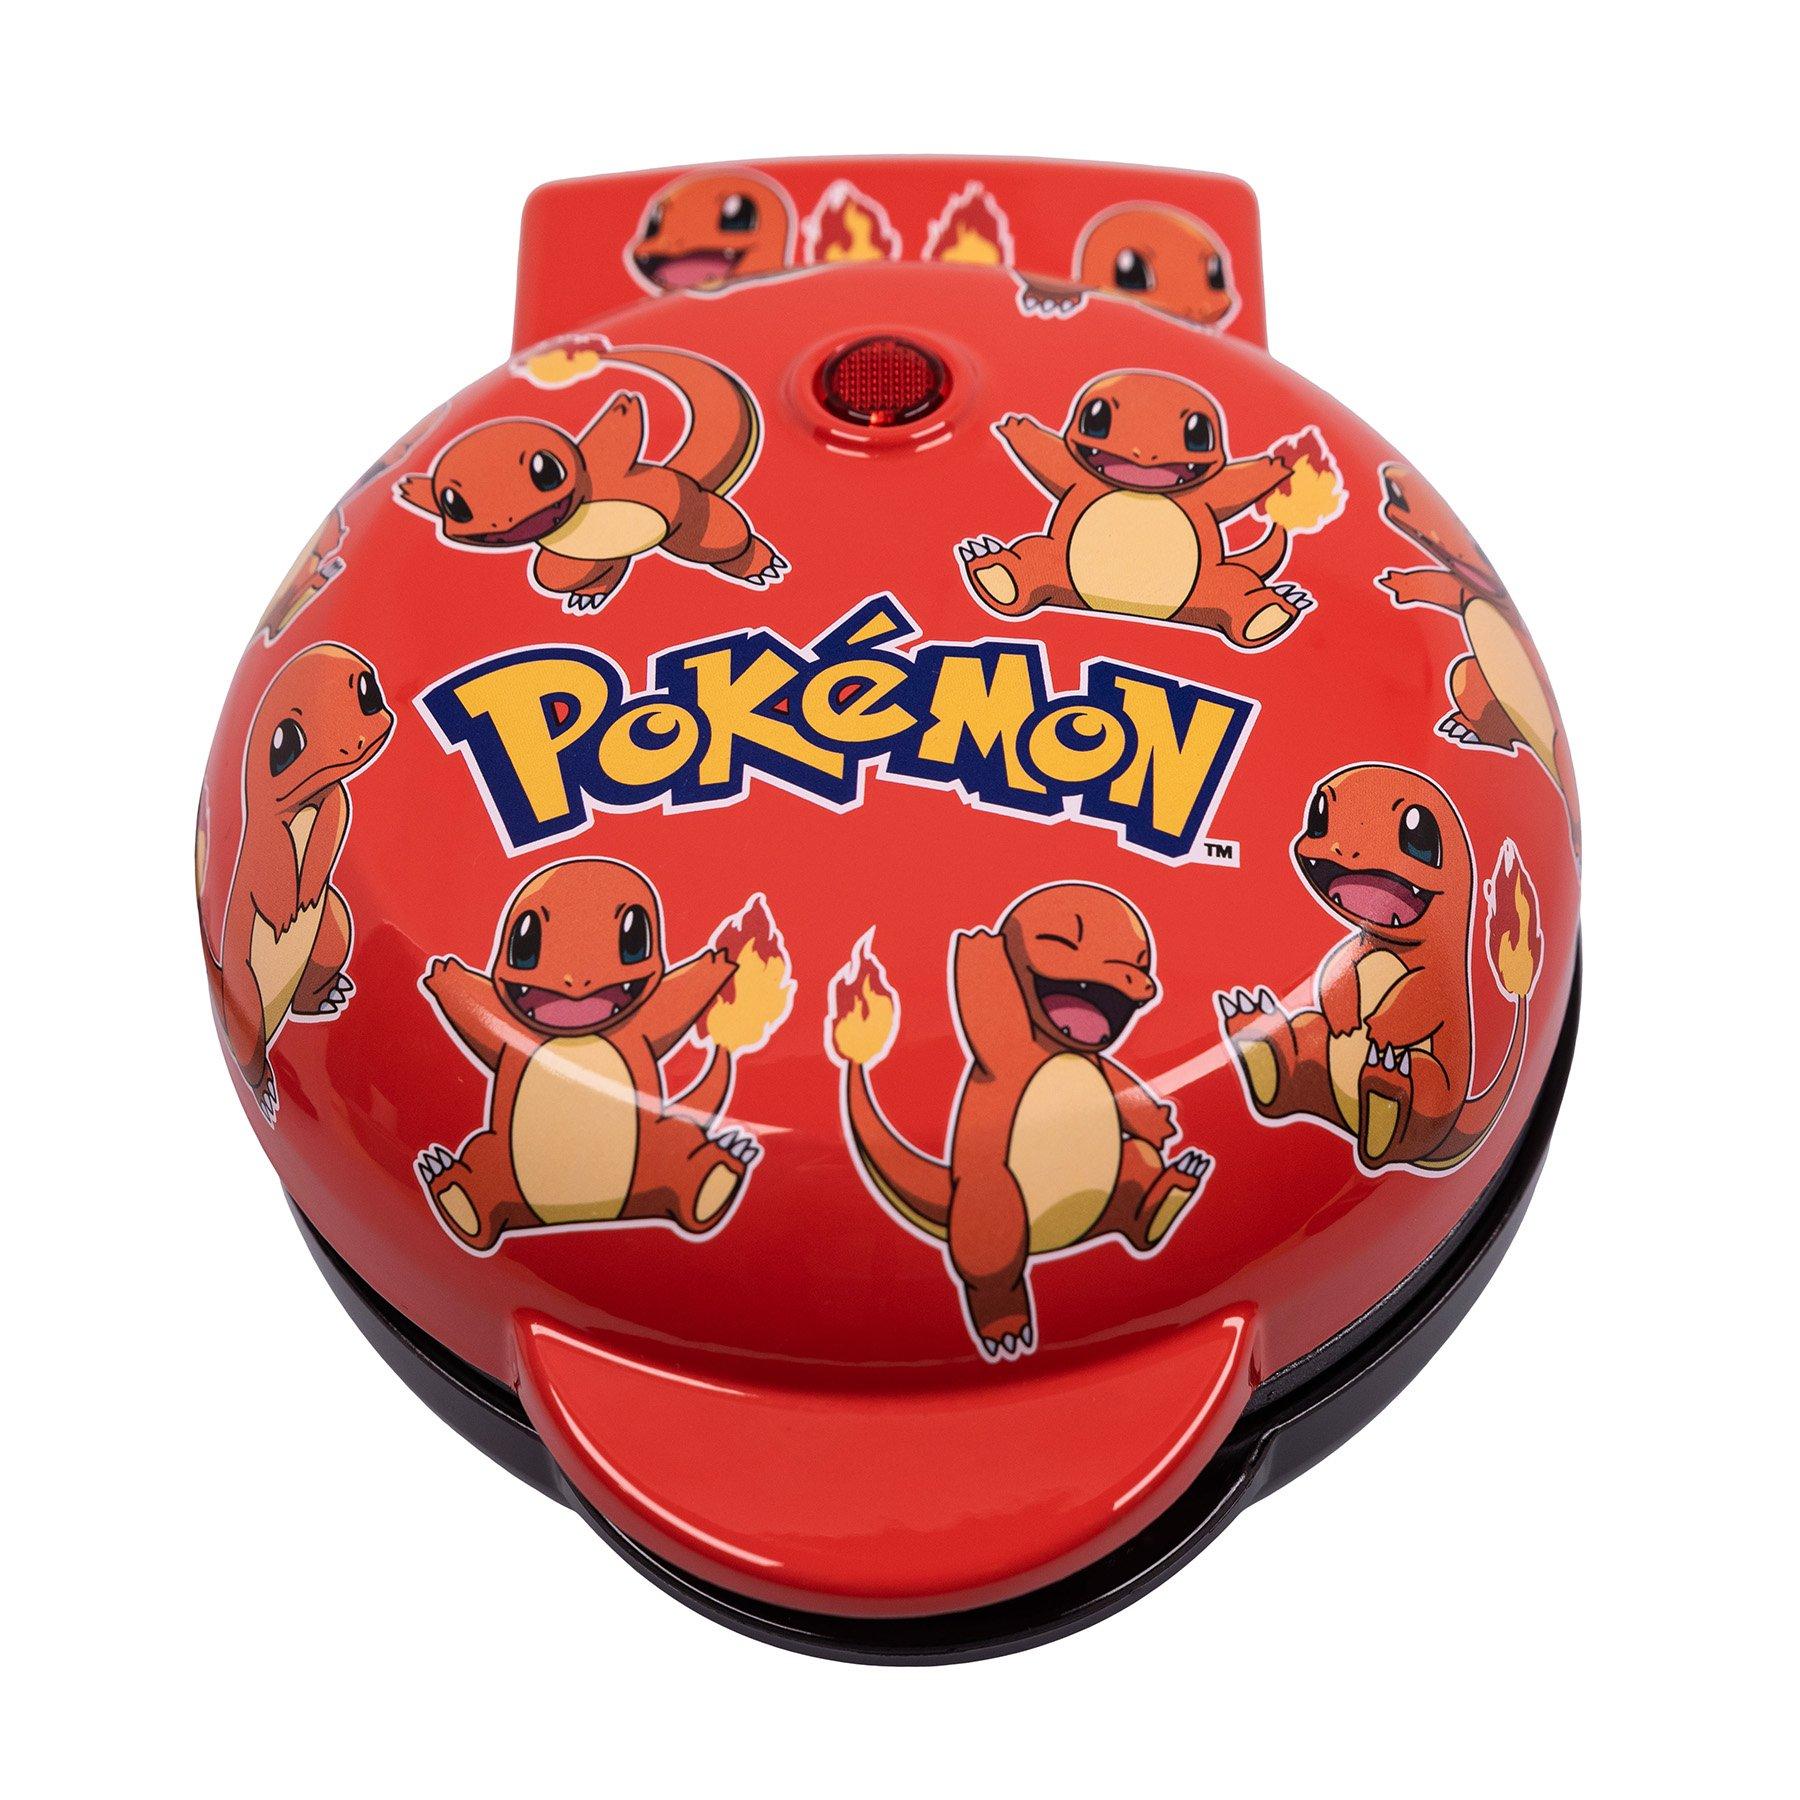 Pokémon Is Releasing a Full Tableware and Kitchen Accessories Collection